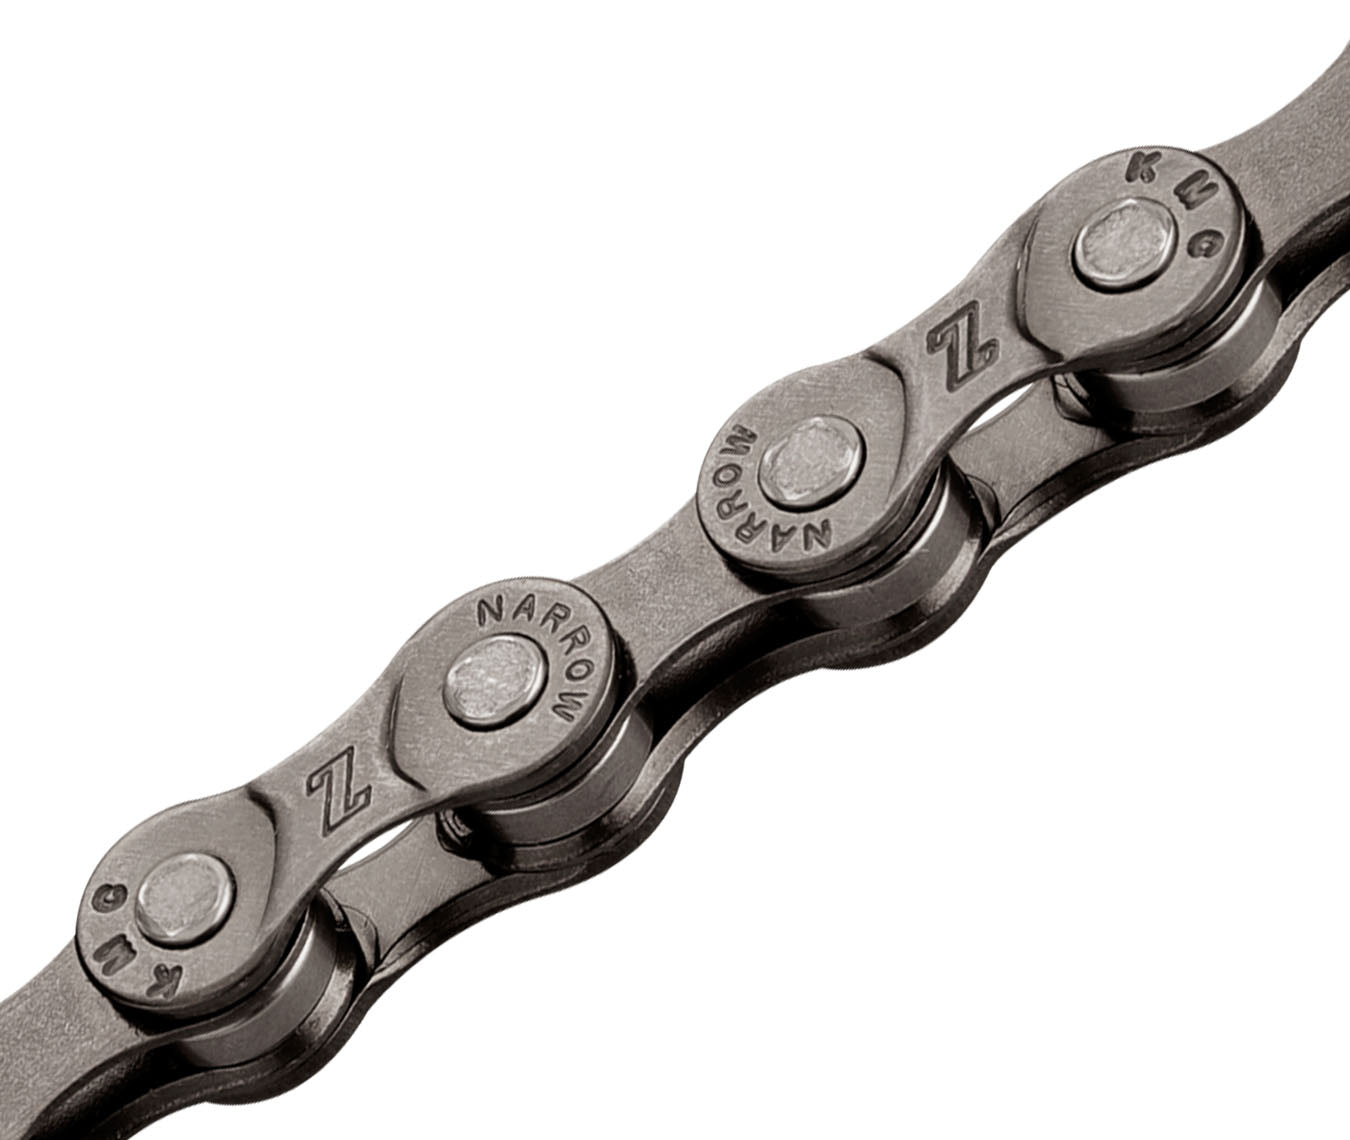 KMC - Z8.1 8-Speed Bicycle Chain (116 Links)